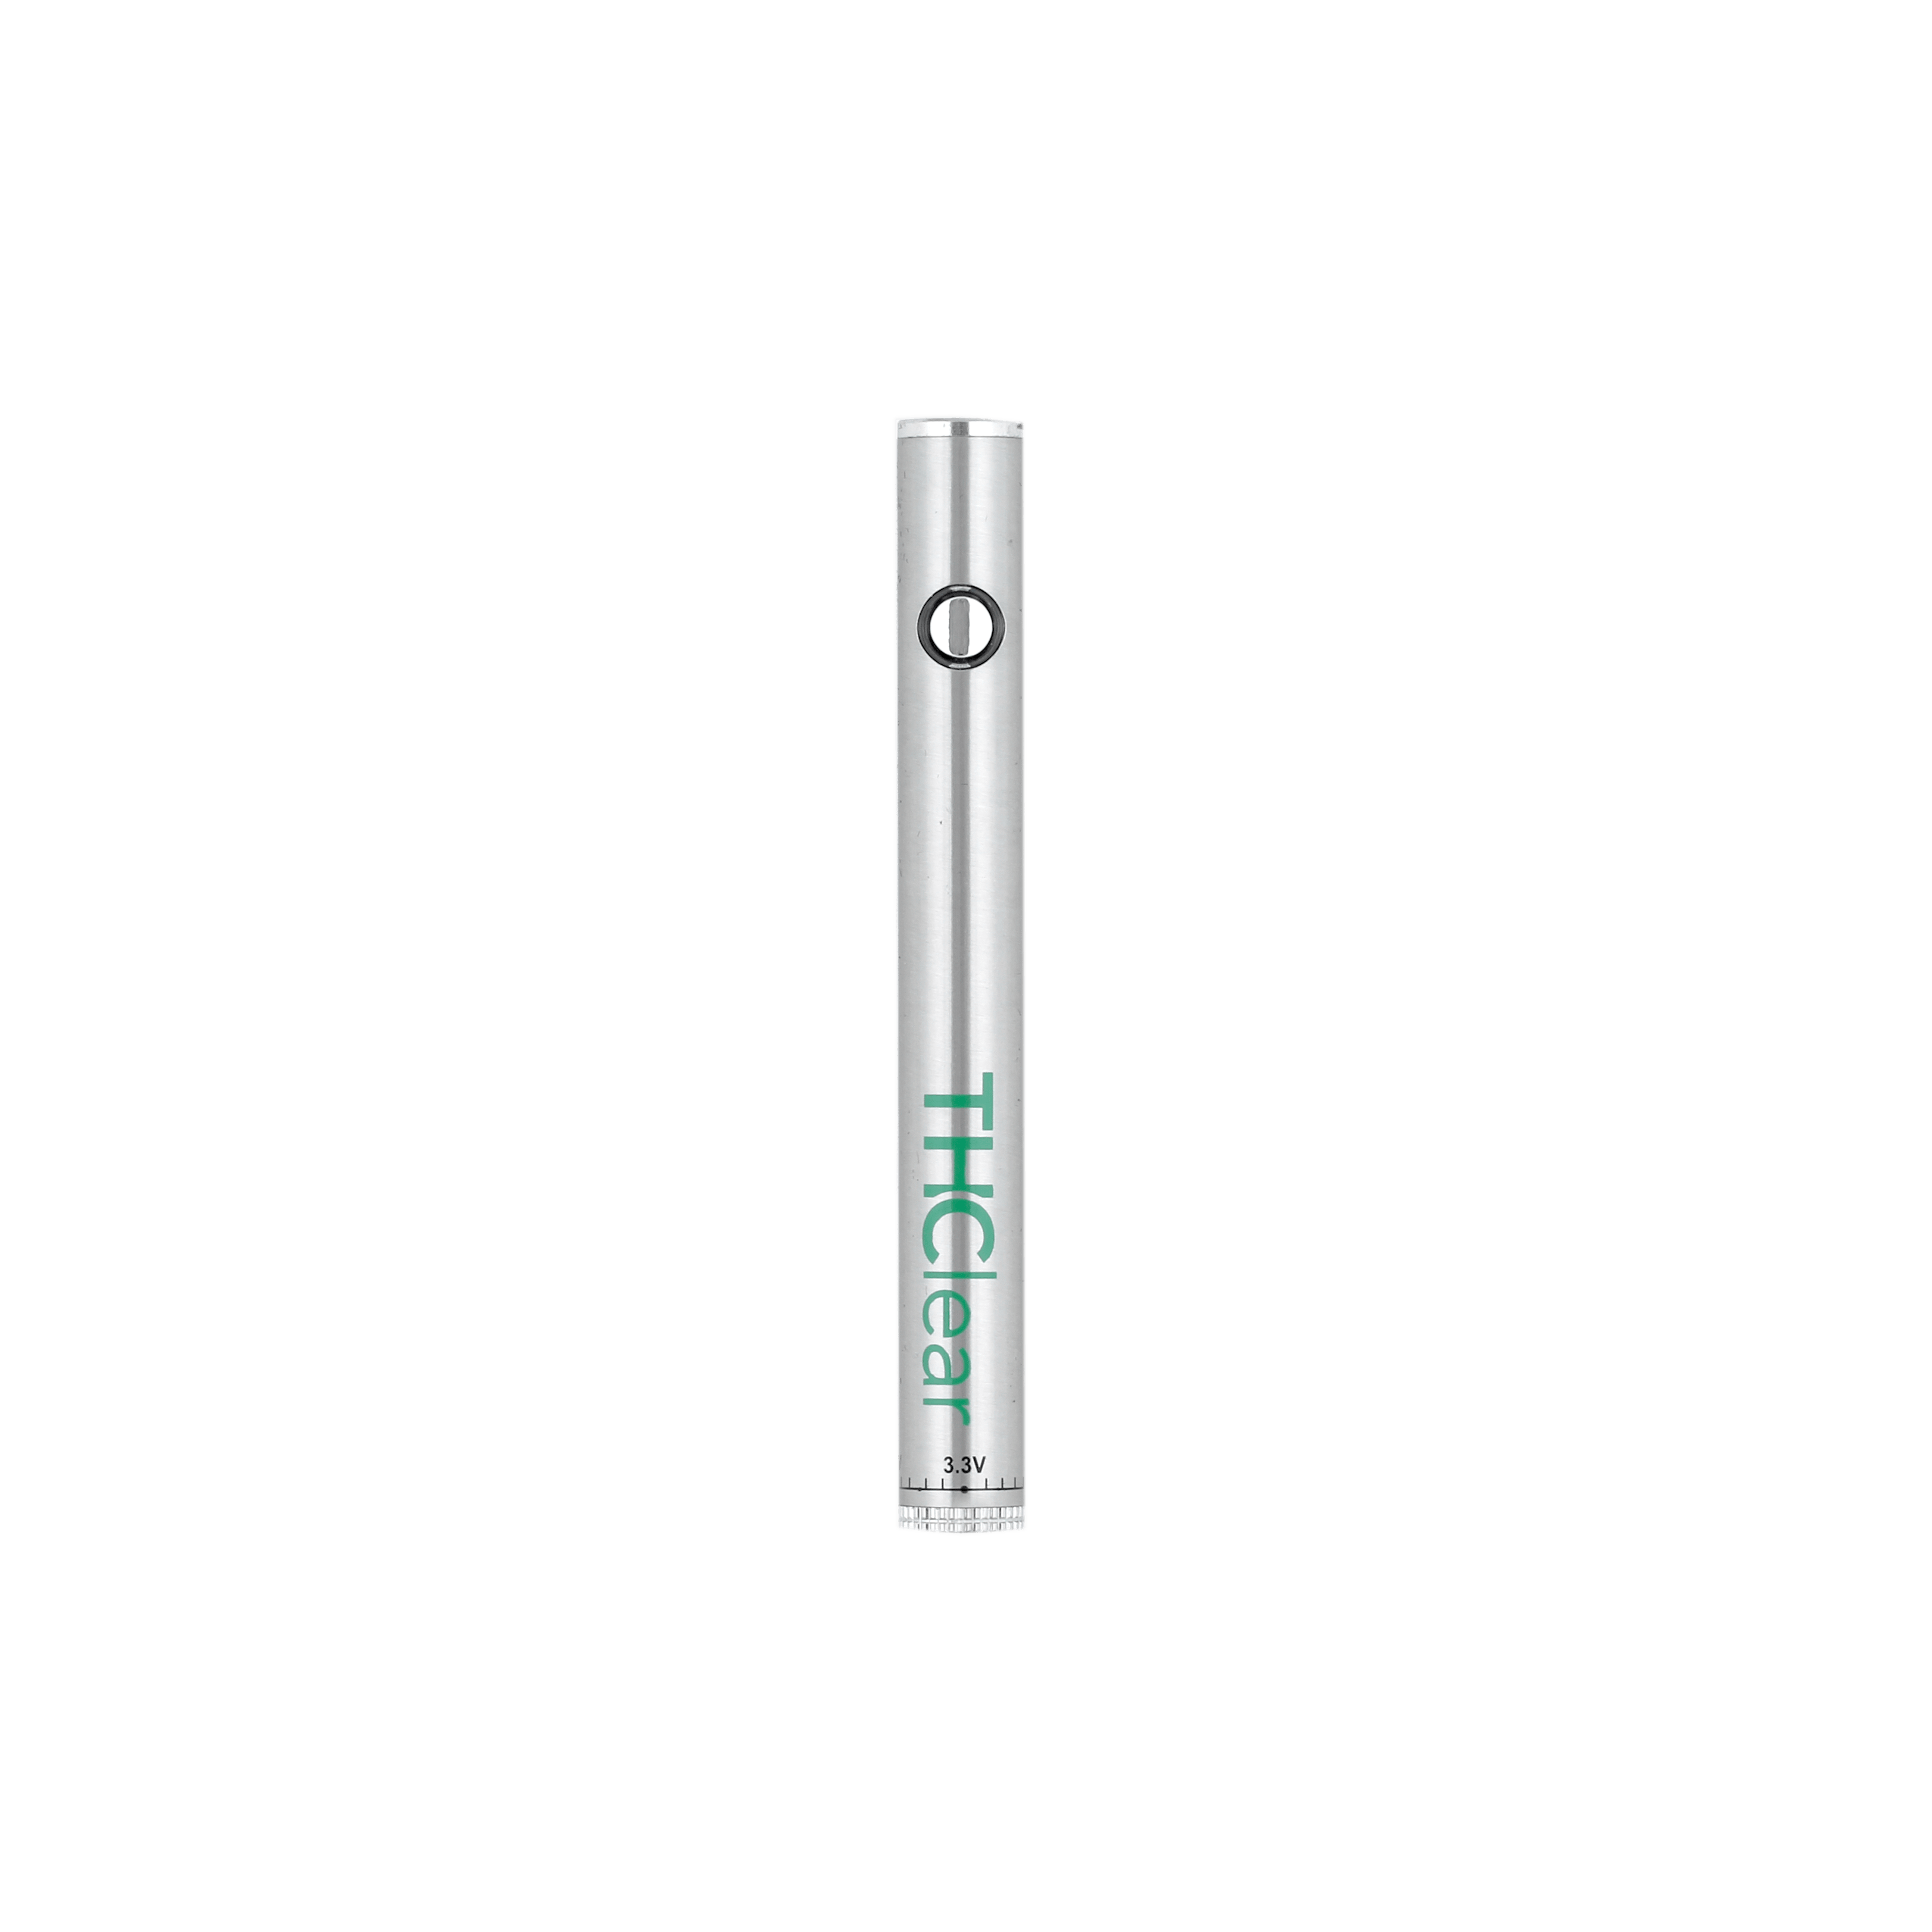 marijuana-dispensaries-manchester-remedy-in-los-angeles-battery-kit-variable-voltage-silver